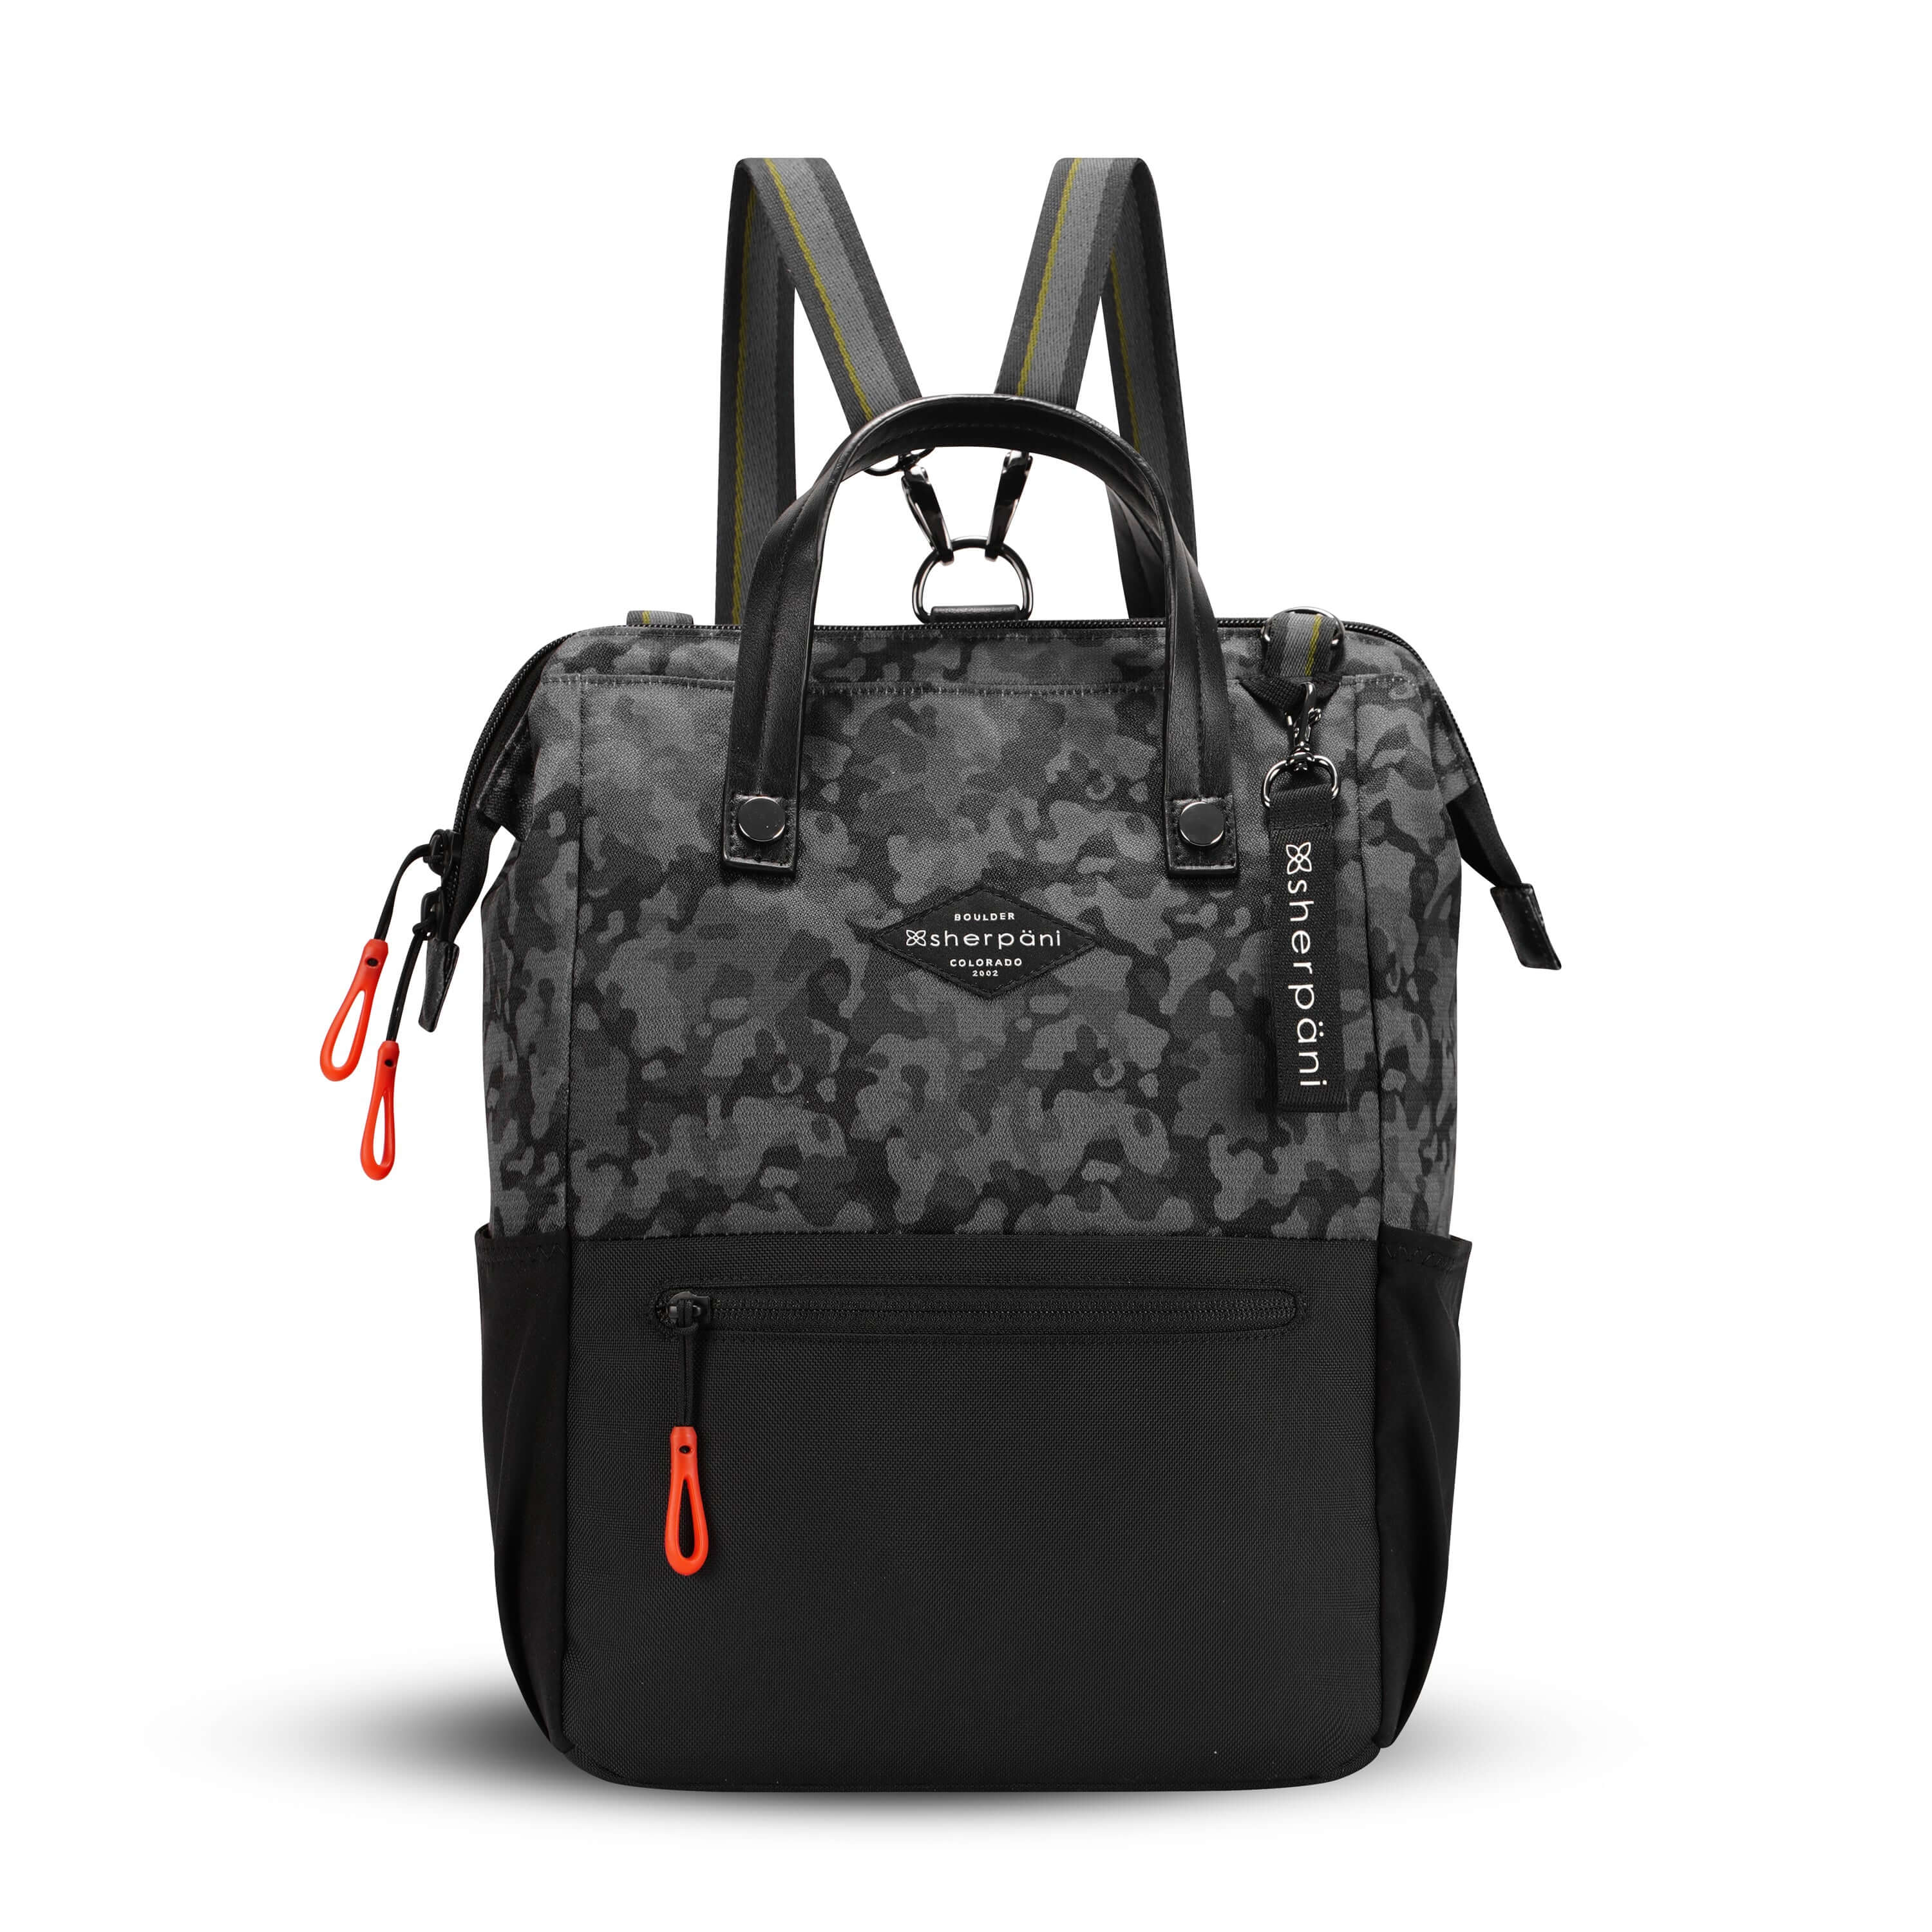 Flat front view of Sherpani three-in-one bag, the Dispatch in Dream Camo. The bag is two-toned: the top is a camouflage pattern of black and gray, and the bottom is black. There is an external zipper pocket on the front panel. Easy-pull zippers are accented in red. A branded Sherpani keychain is clipped to the upper right corner. Elastic water bottle holders sit on either side of the bag. It has short tote handles and adjustable straps that can function for a backpack or crossbody. 